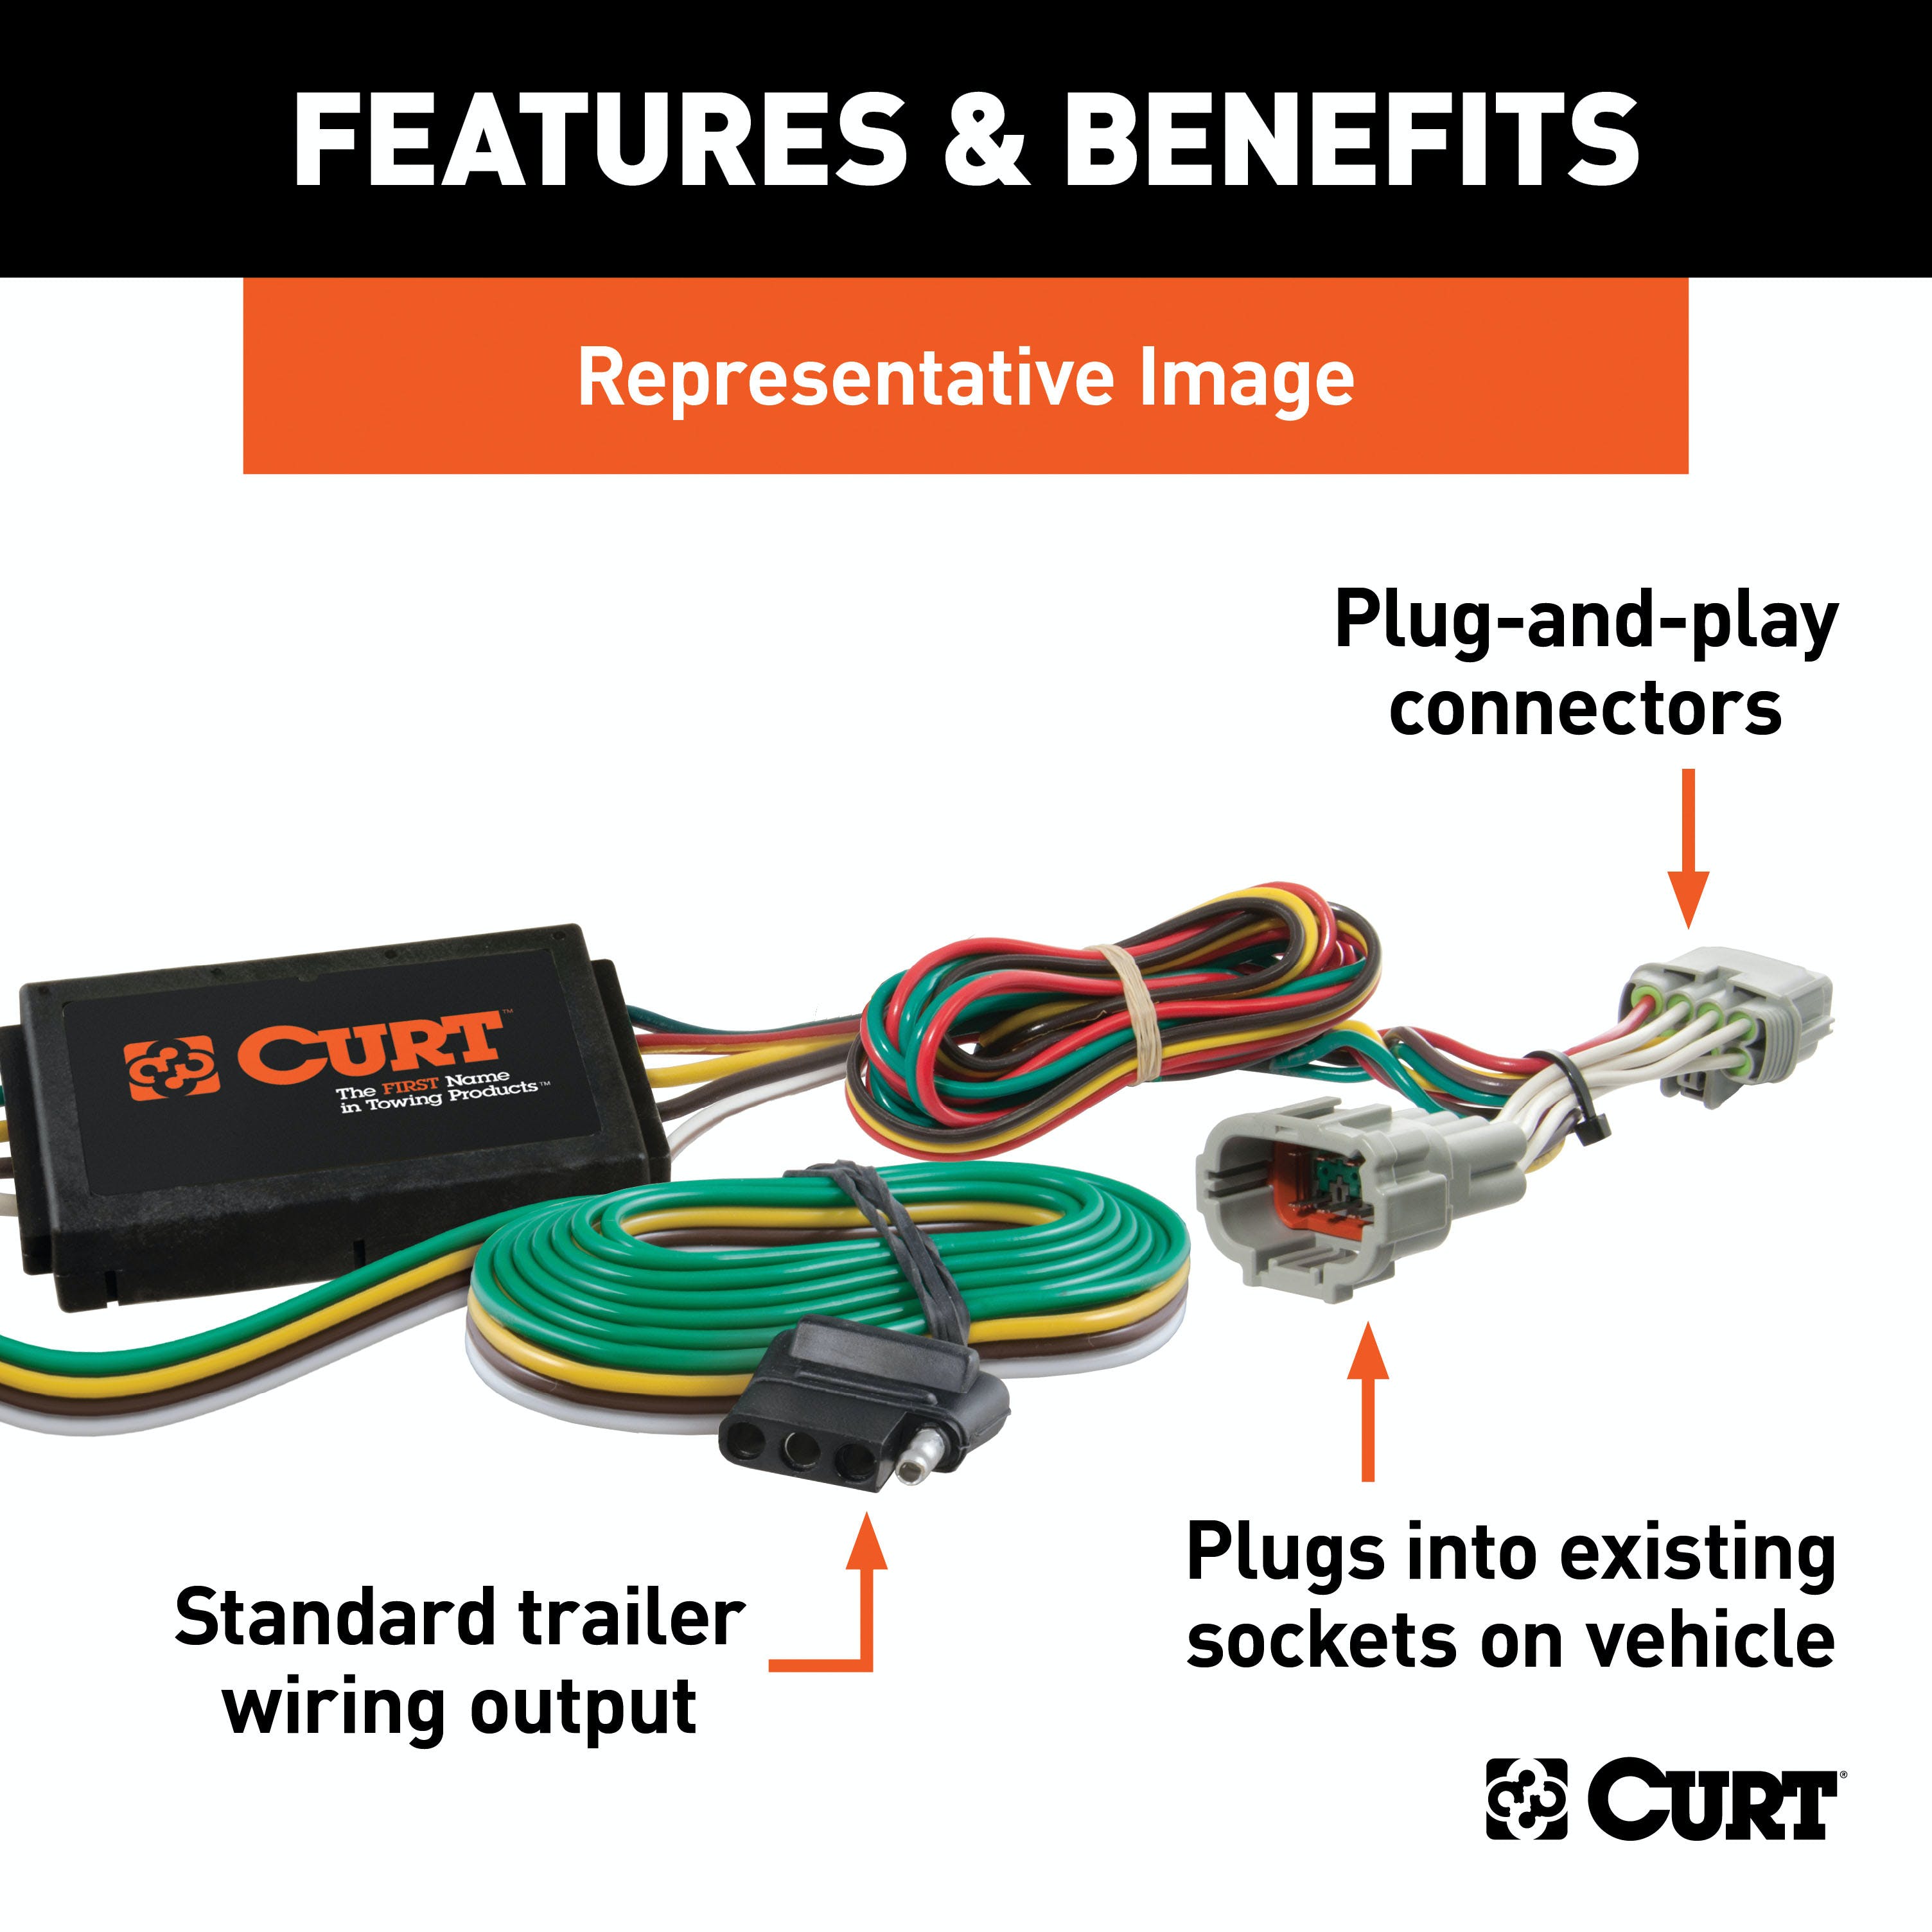 CURT 56275 Custom Wiring Harness, 4-Way Flat Output, Select Toyota Prius C